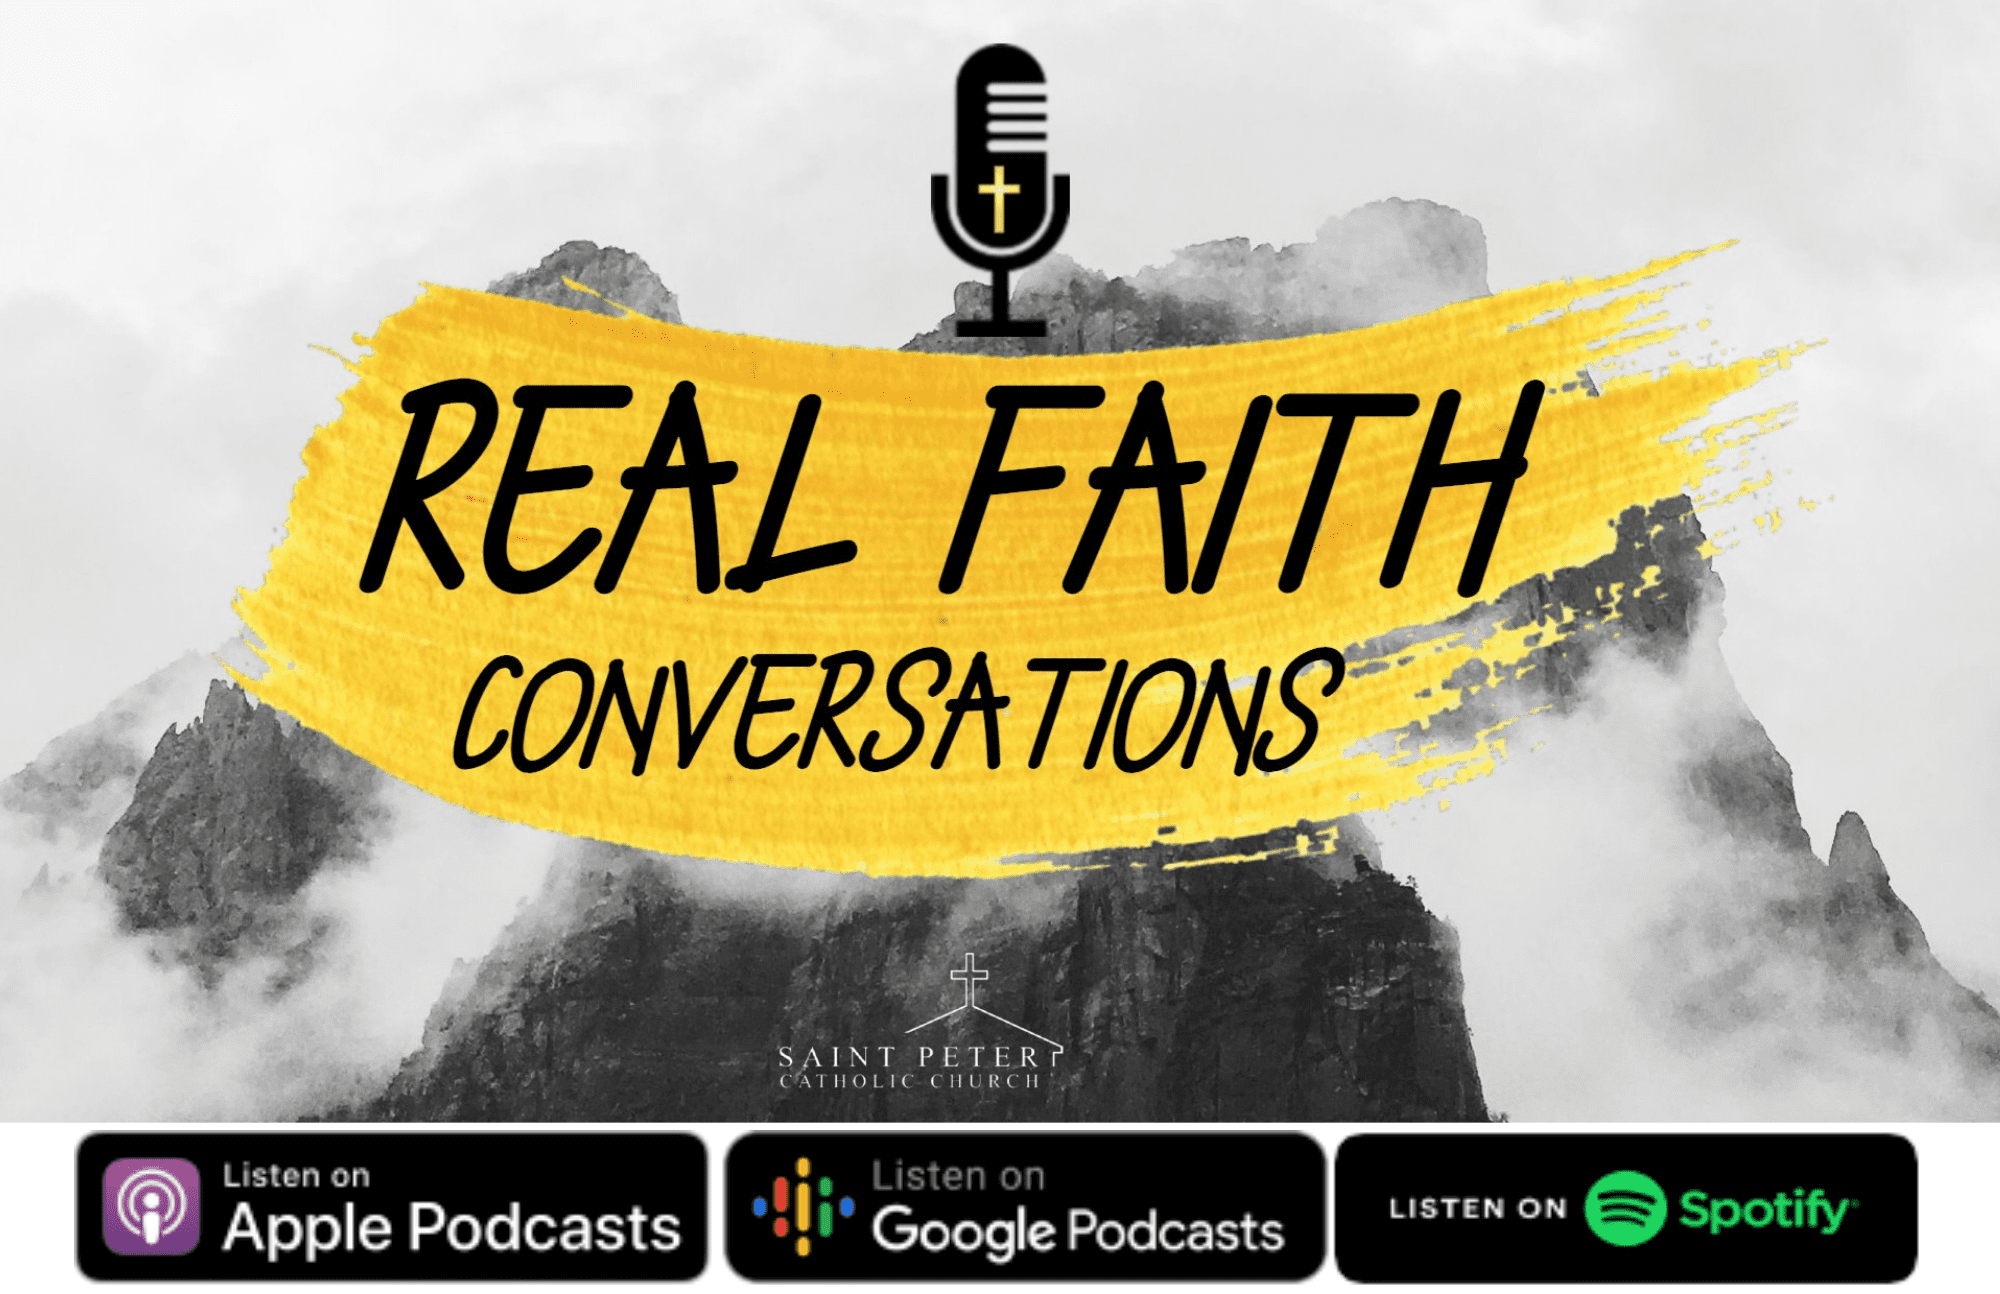 Search Our Parish Podcast!